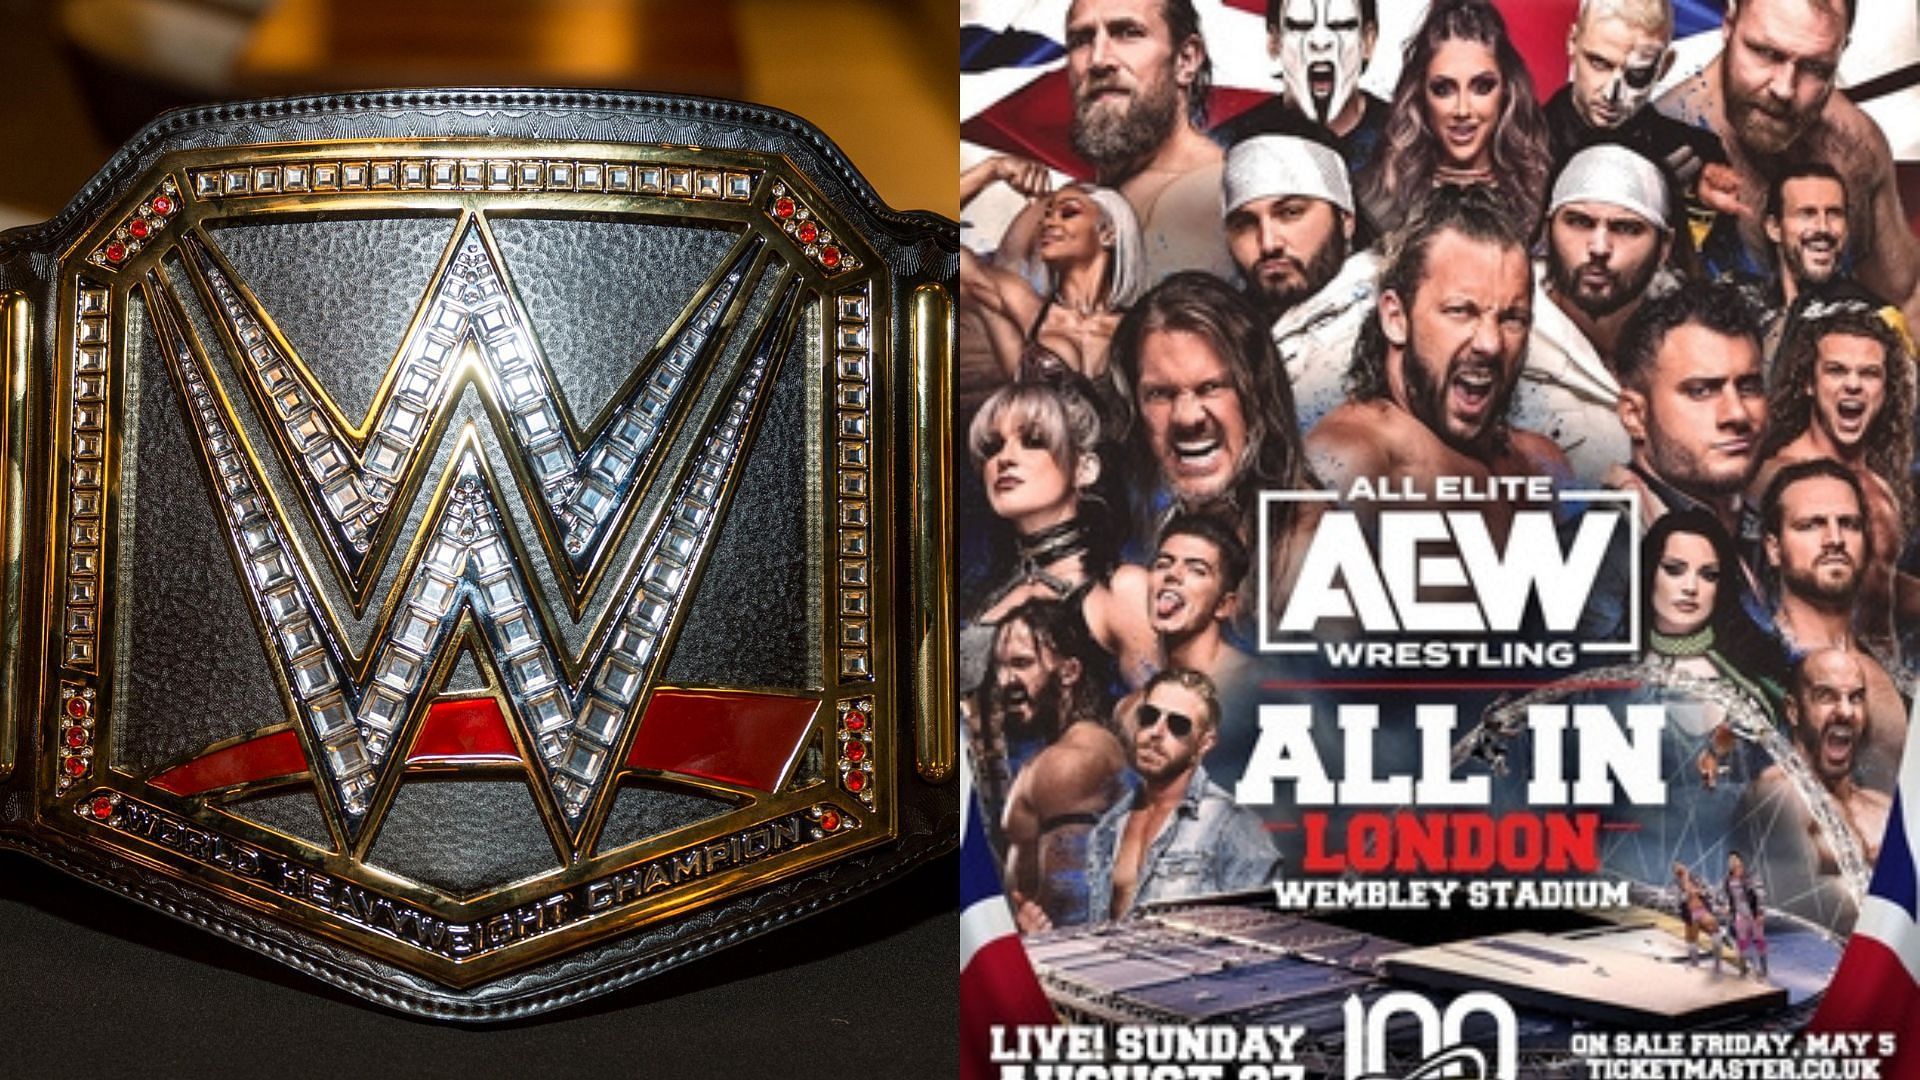 Wembley Stadium will host AEW All In this August.